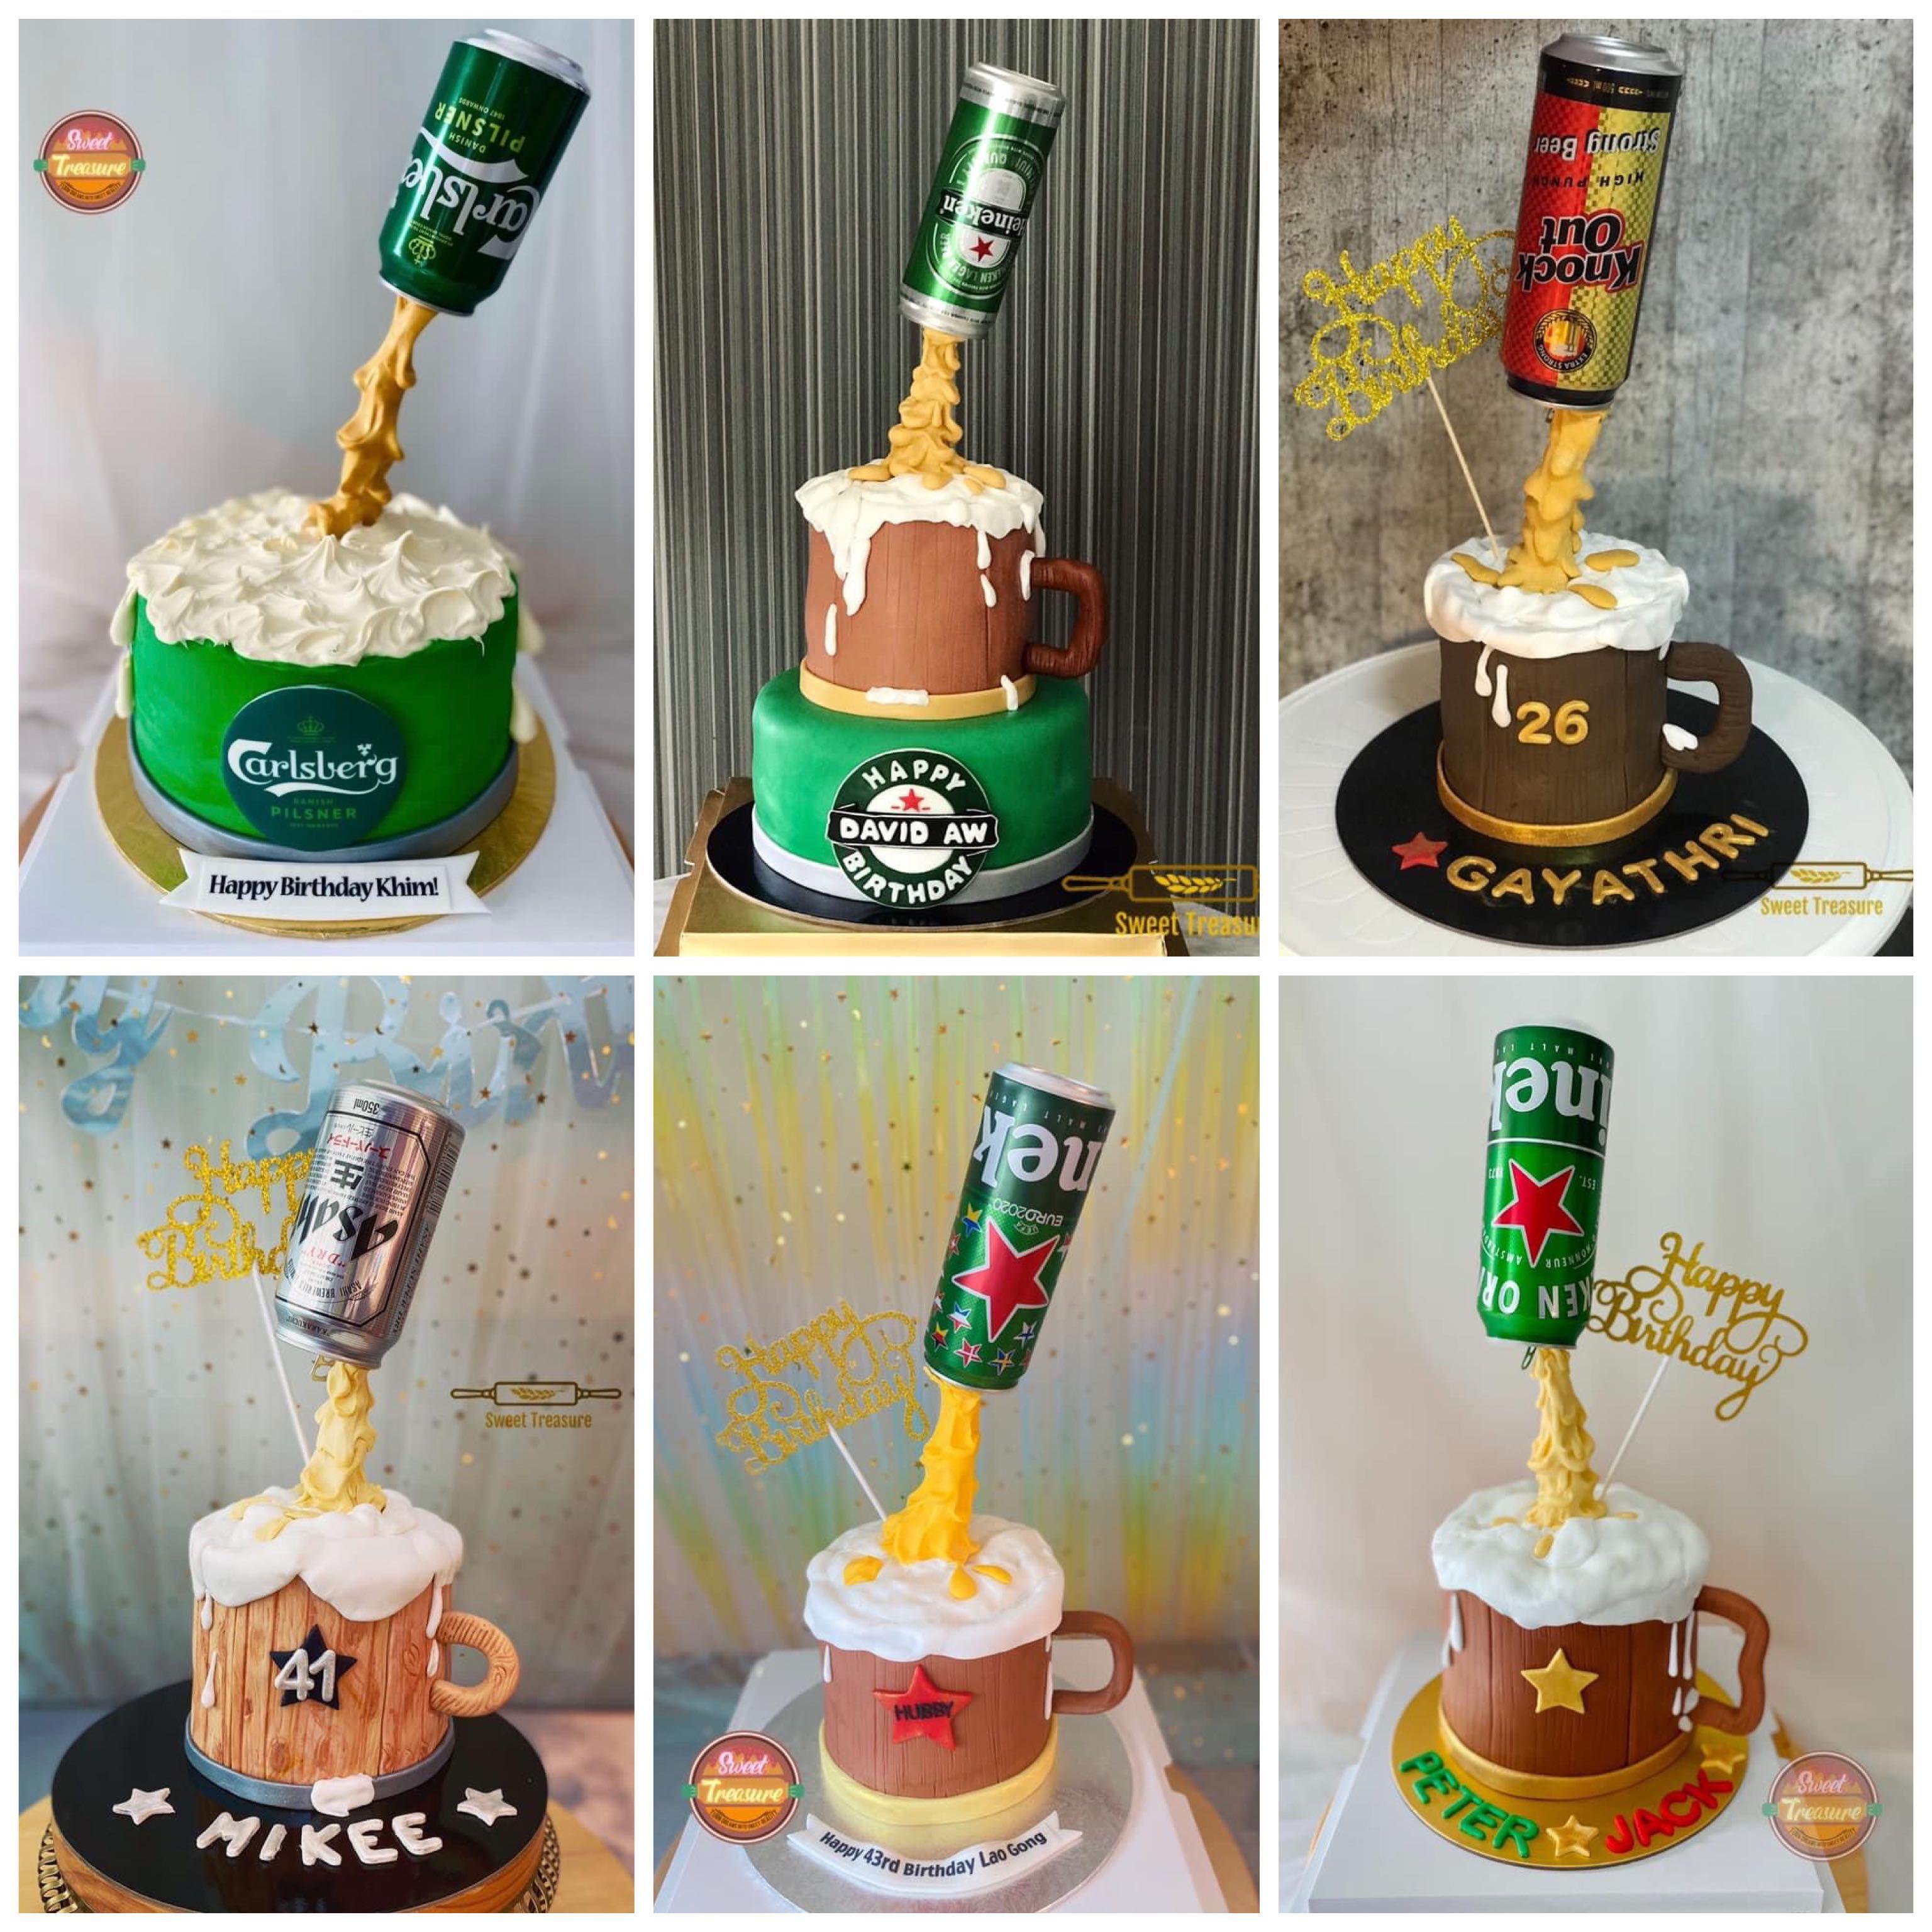 Make an Awesome Craft Beer Cake in 5 Minutes - Using Cans